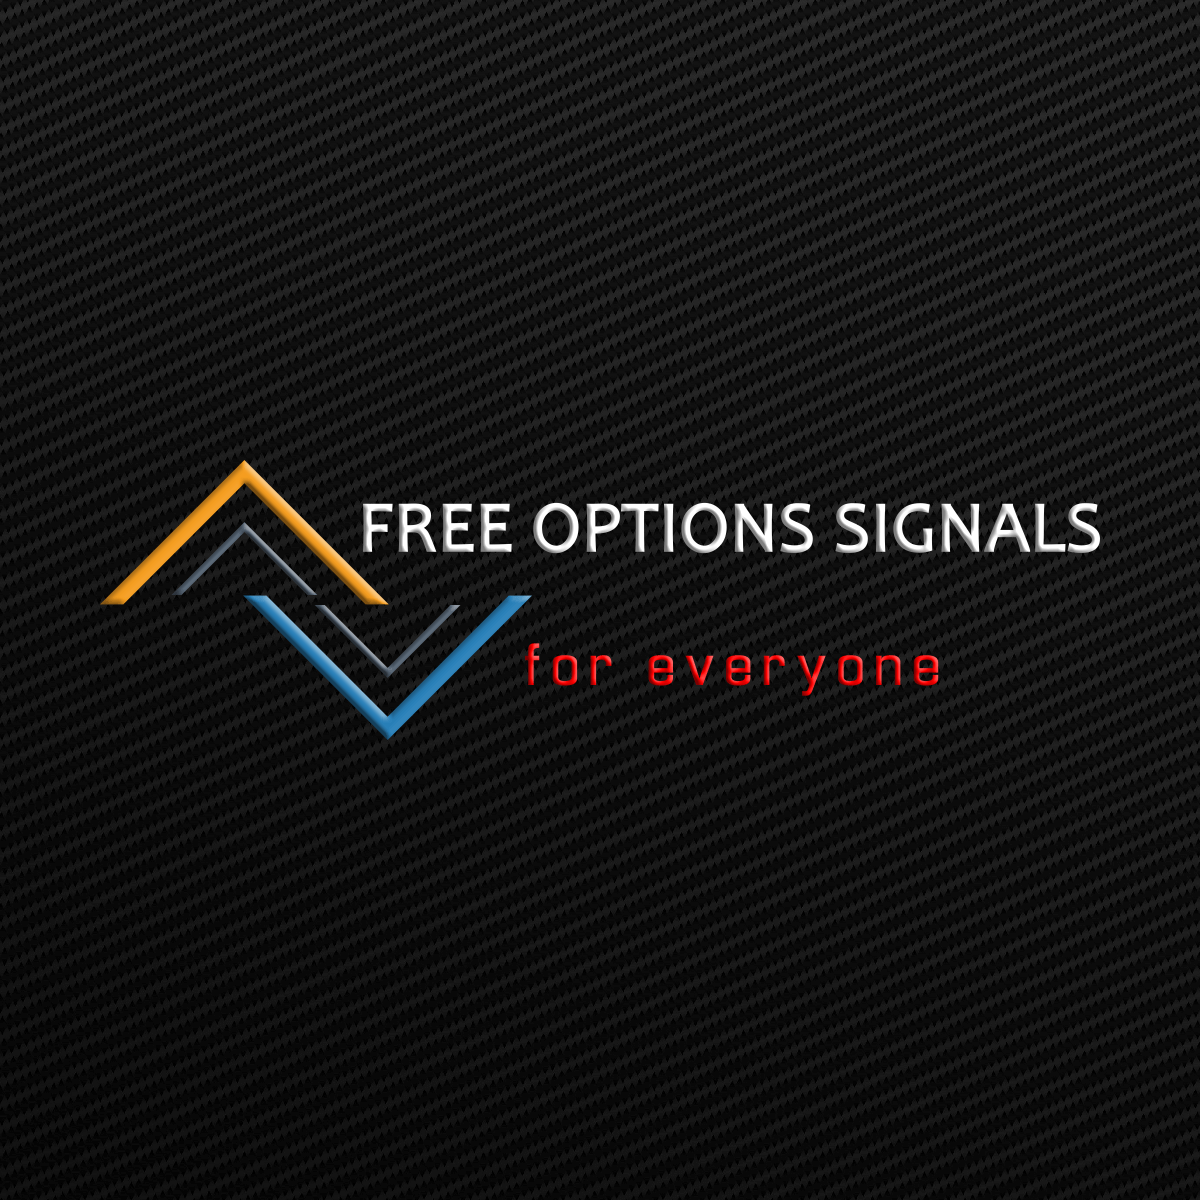 Binary options signal services